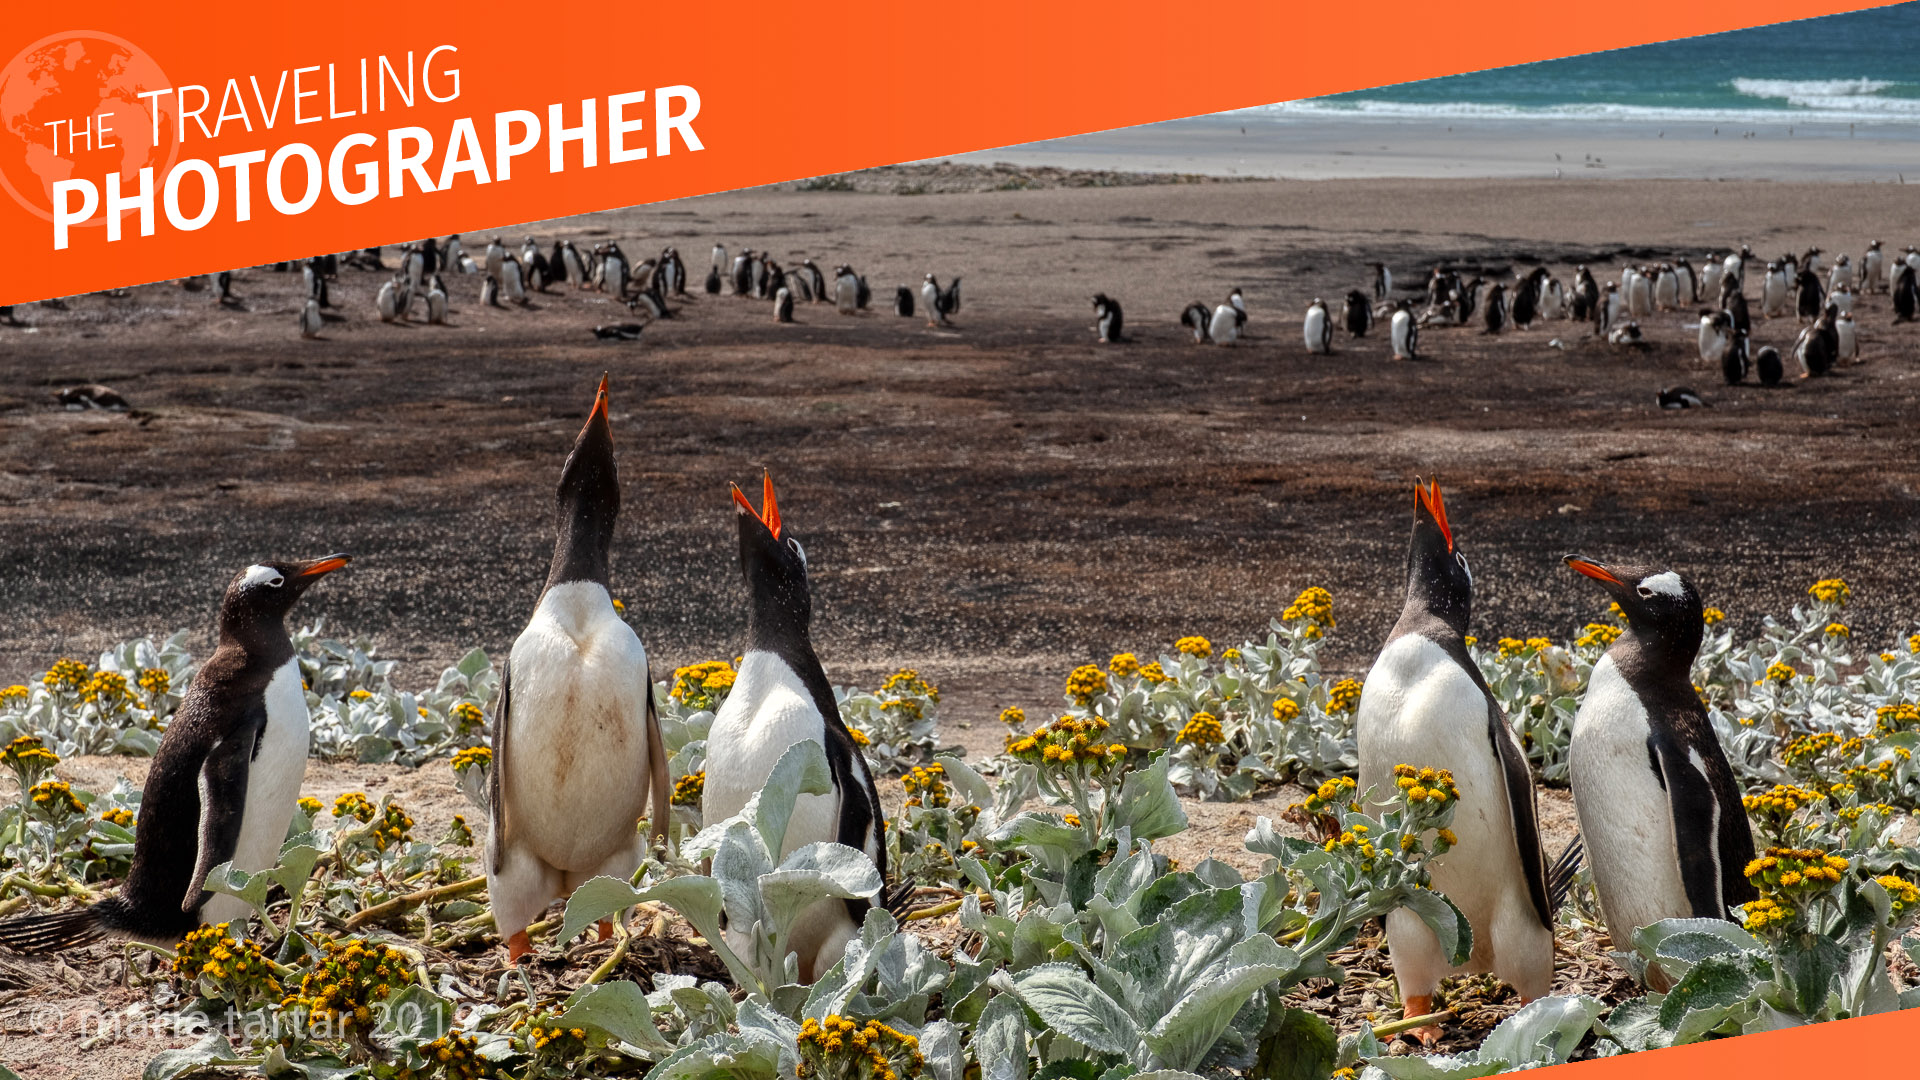 Gentoo penguins recognize each other by their distinctive calls on a beach in the Falkland Islands.